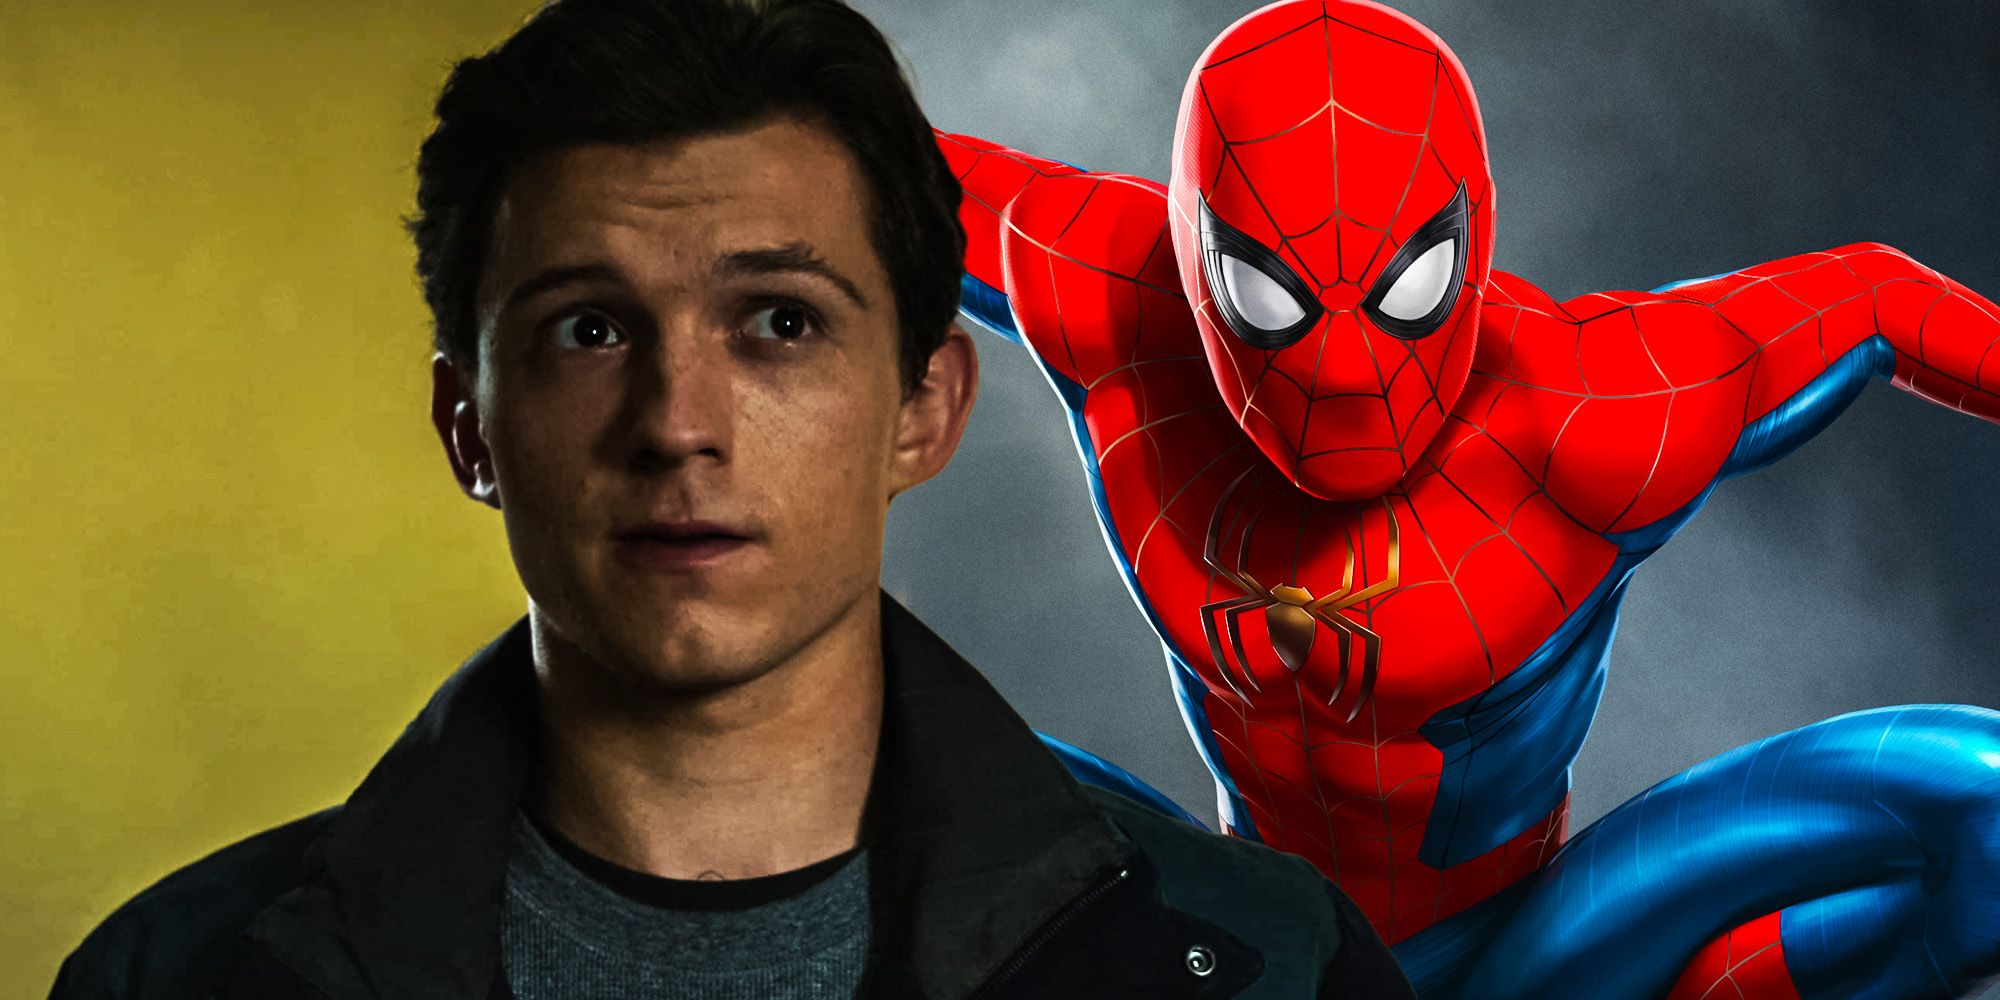 Spider-Man: No Way Home's Ending Suit Is Even Deeper Than You Realize